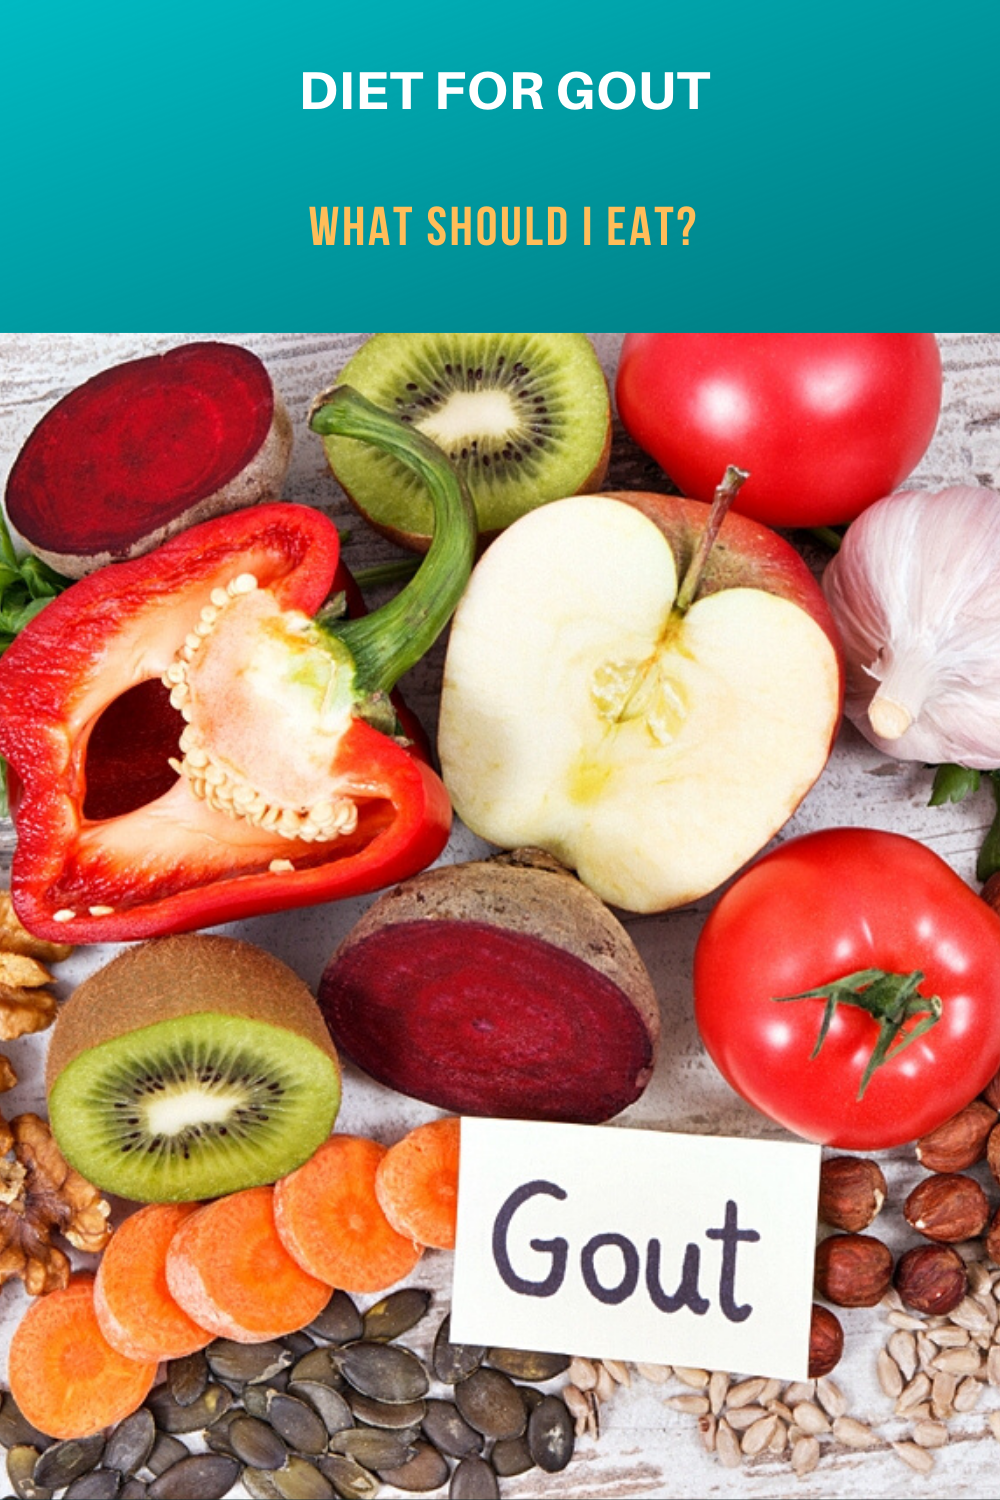 Diet for Gout: What Should I Eat?